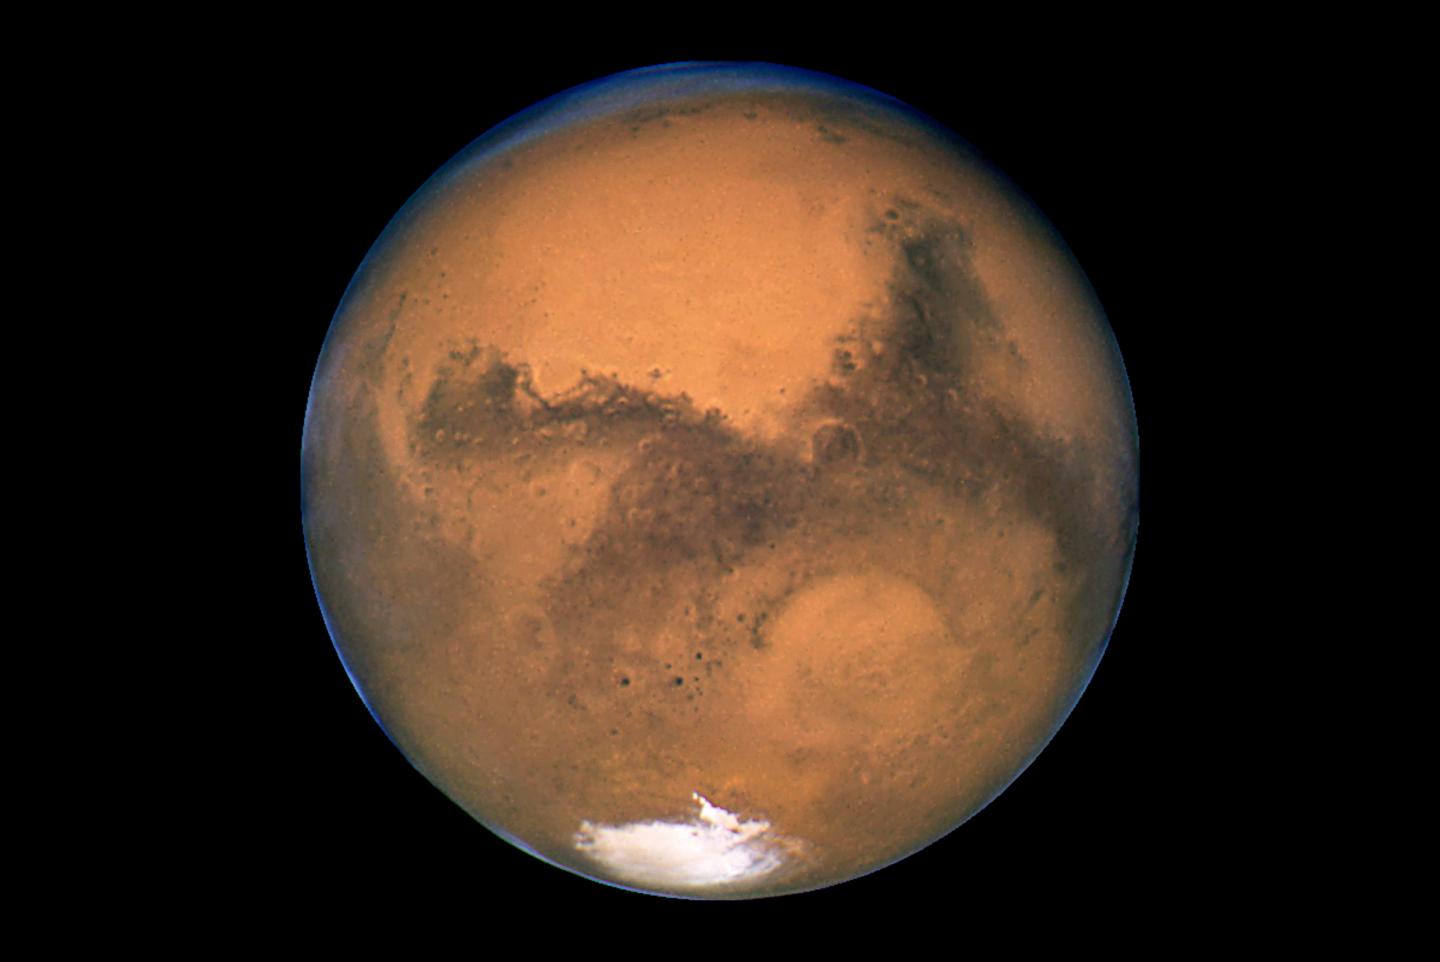 Photograph of Mars taken by the Hubble Space Telescope during opposition in 2003.